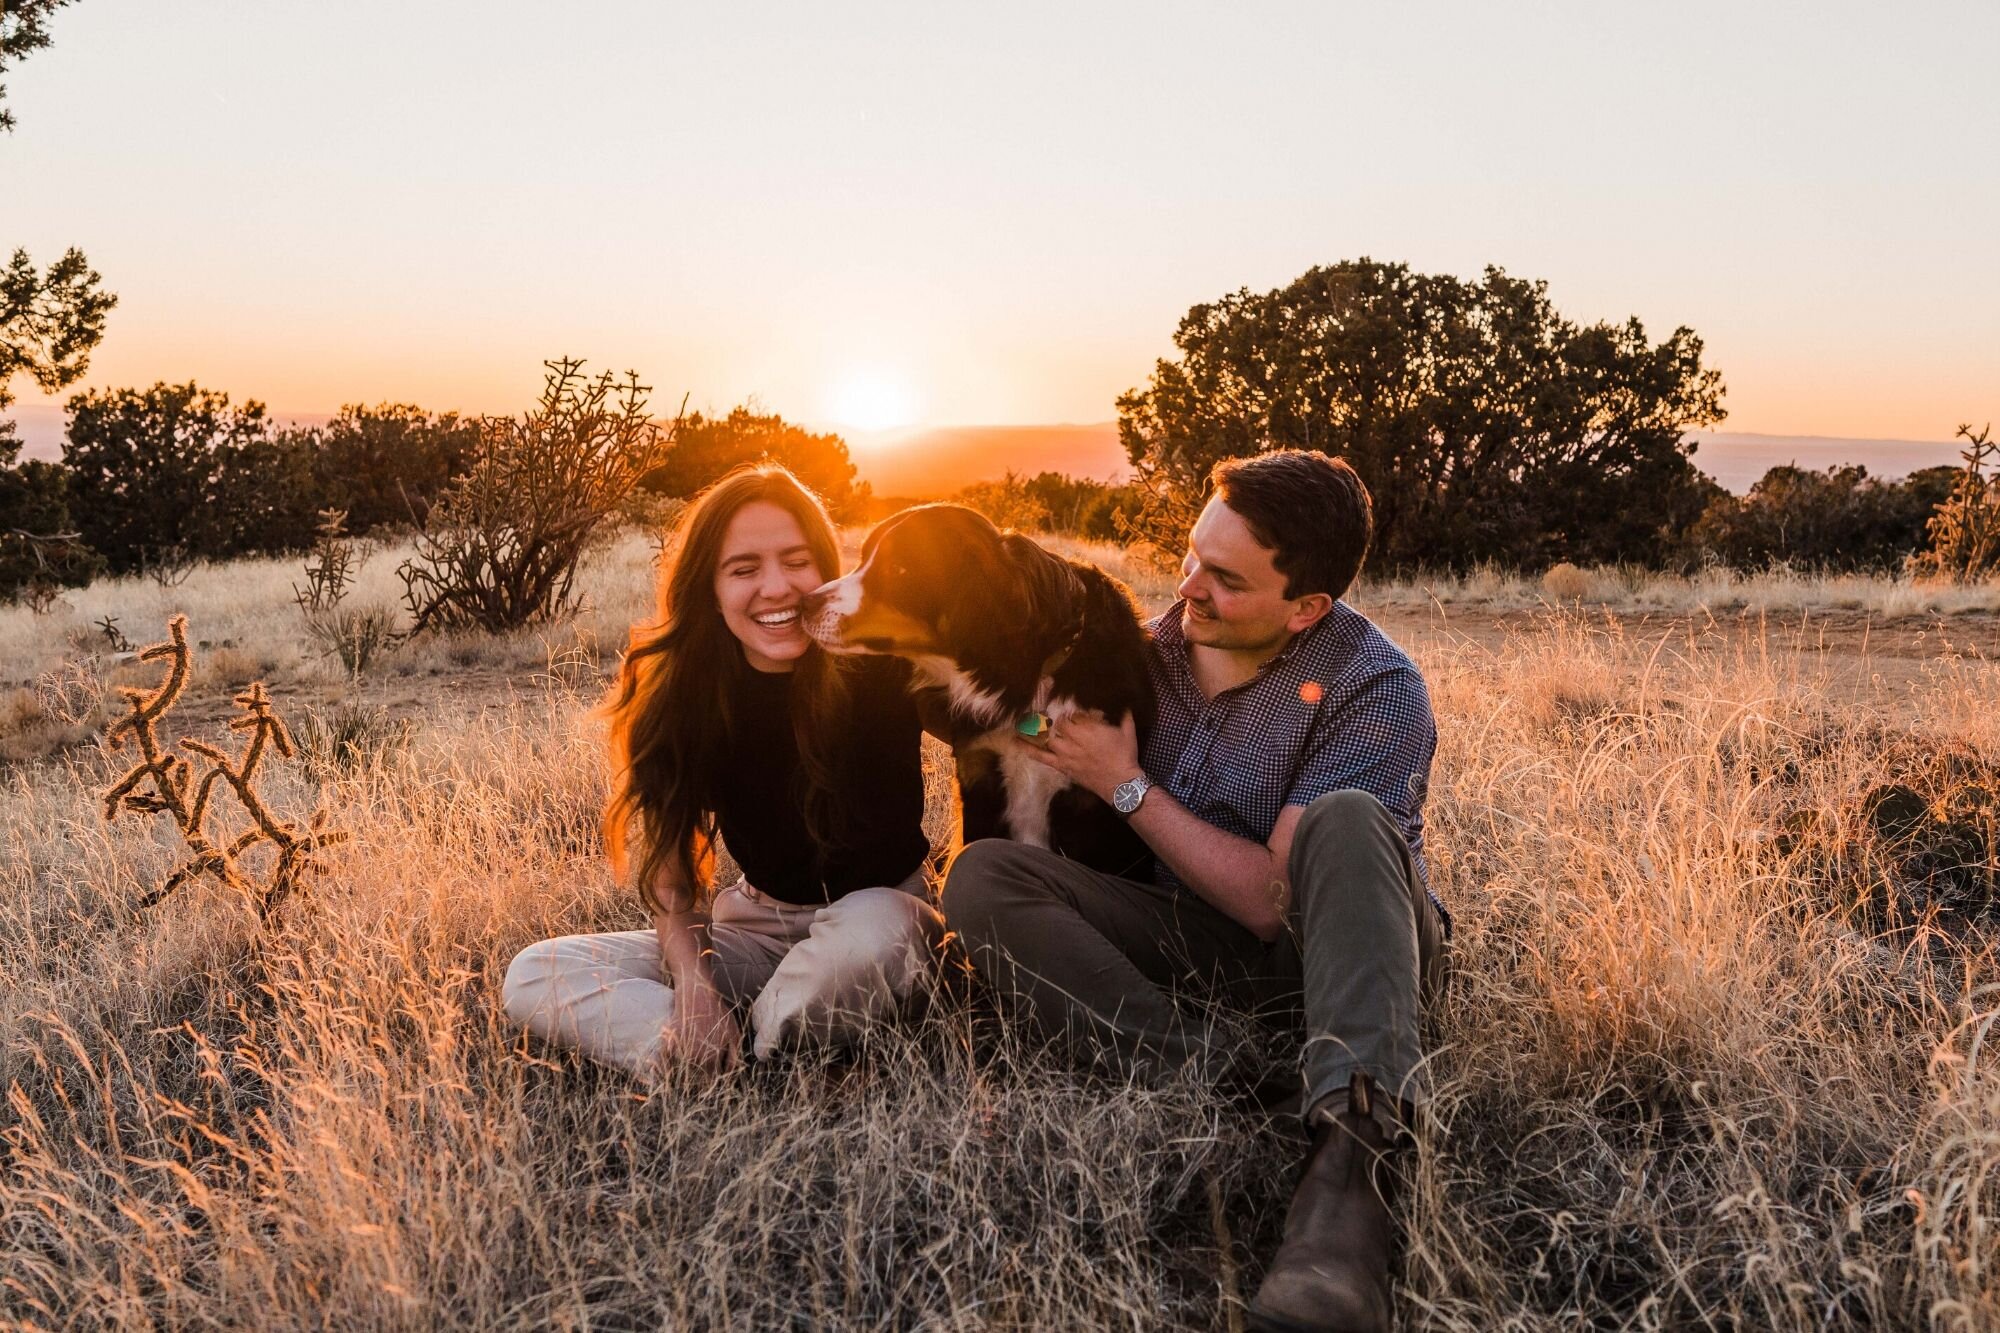 High Desert Couples Session in Albuquerque, New Mexico | Between the Pine Adventure Elopement and Wedding Photography